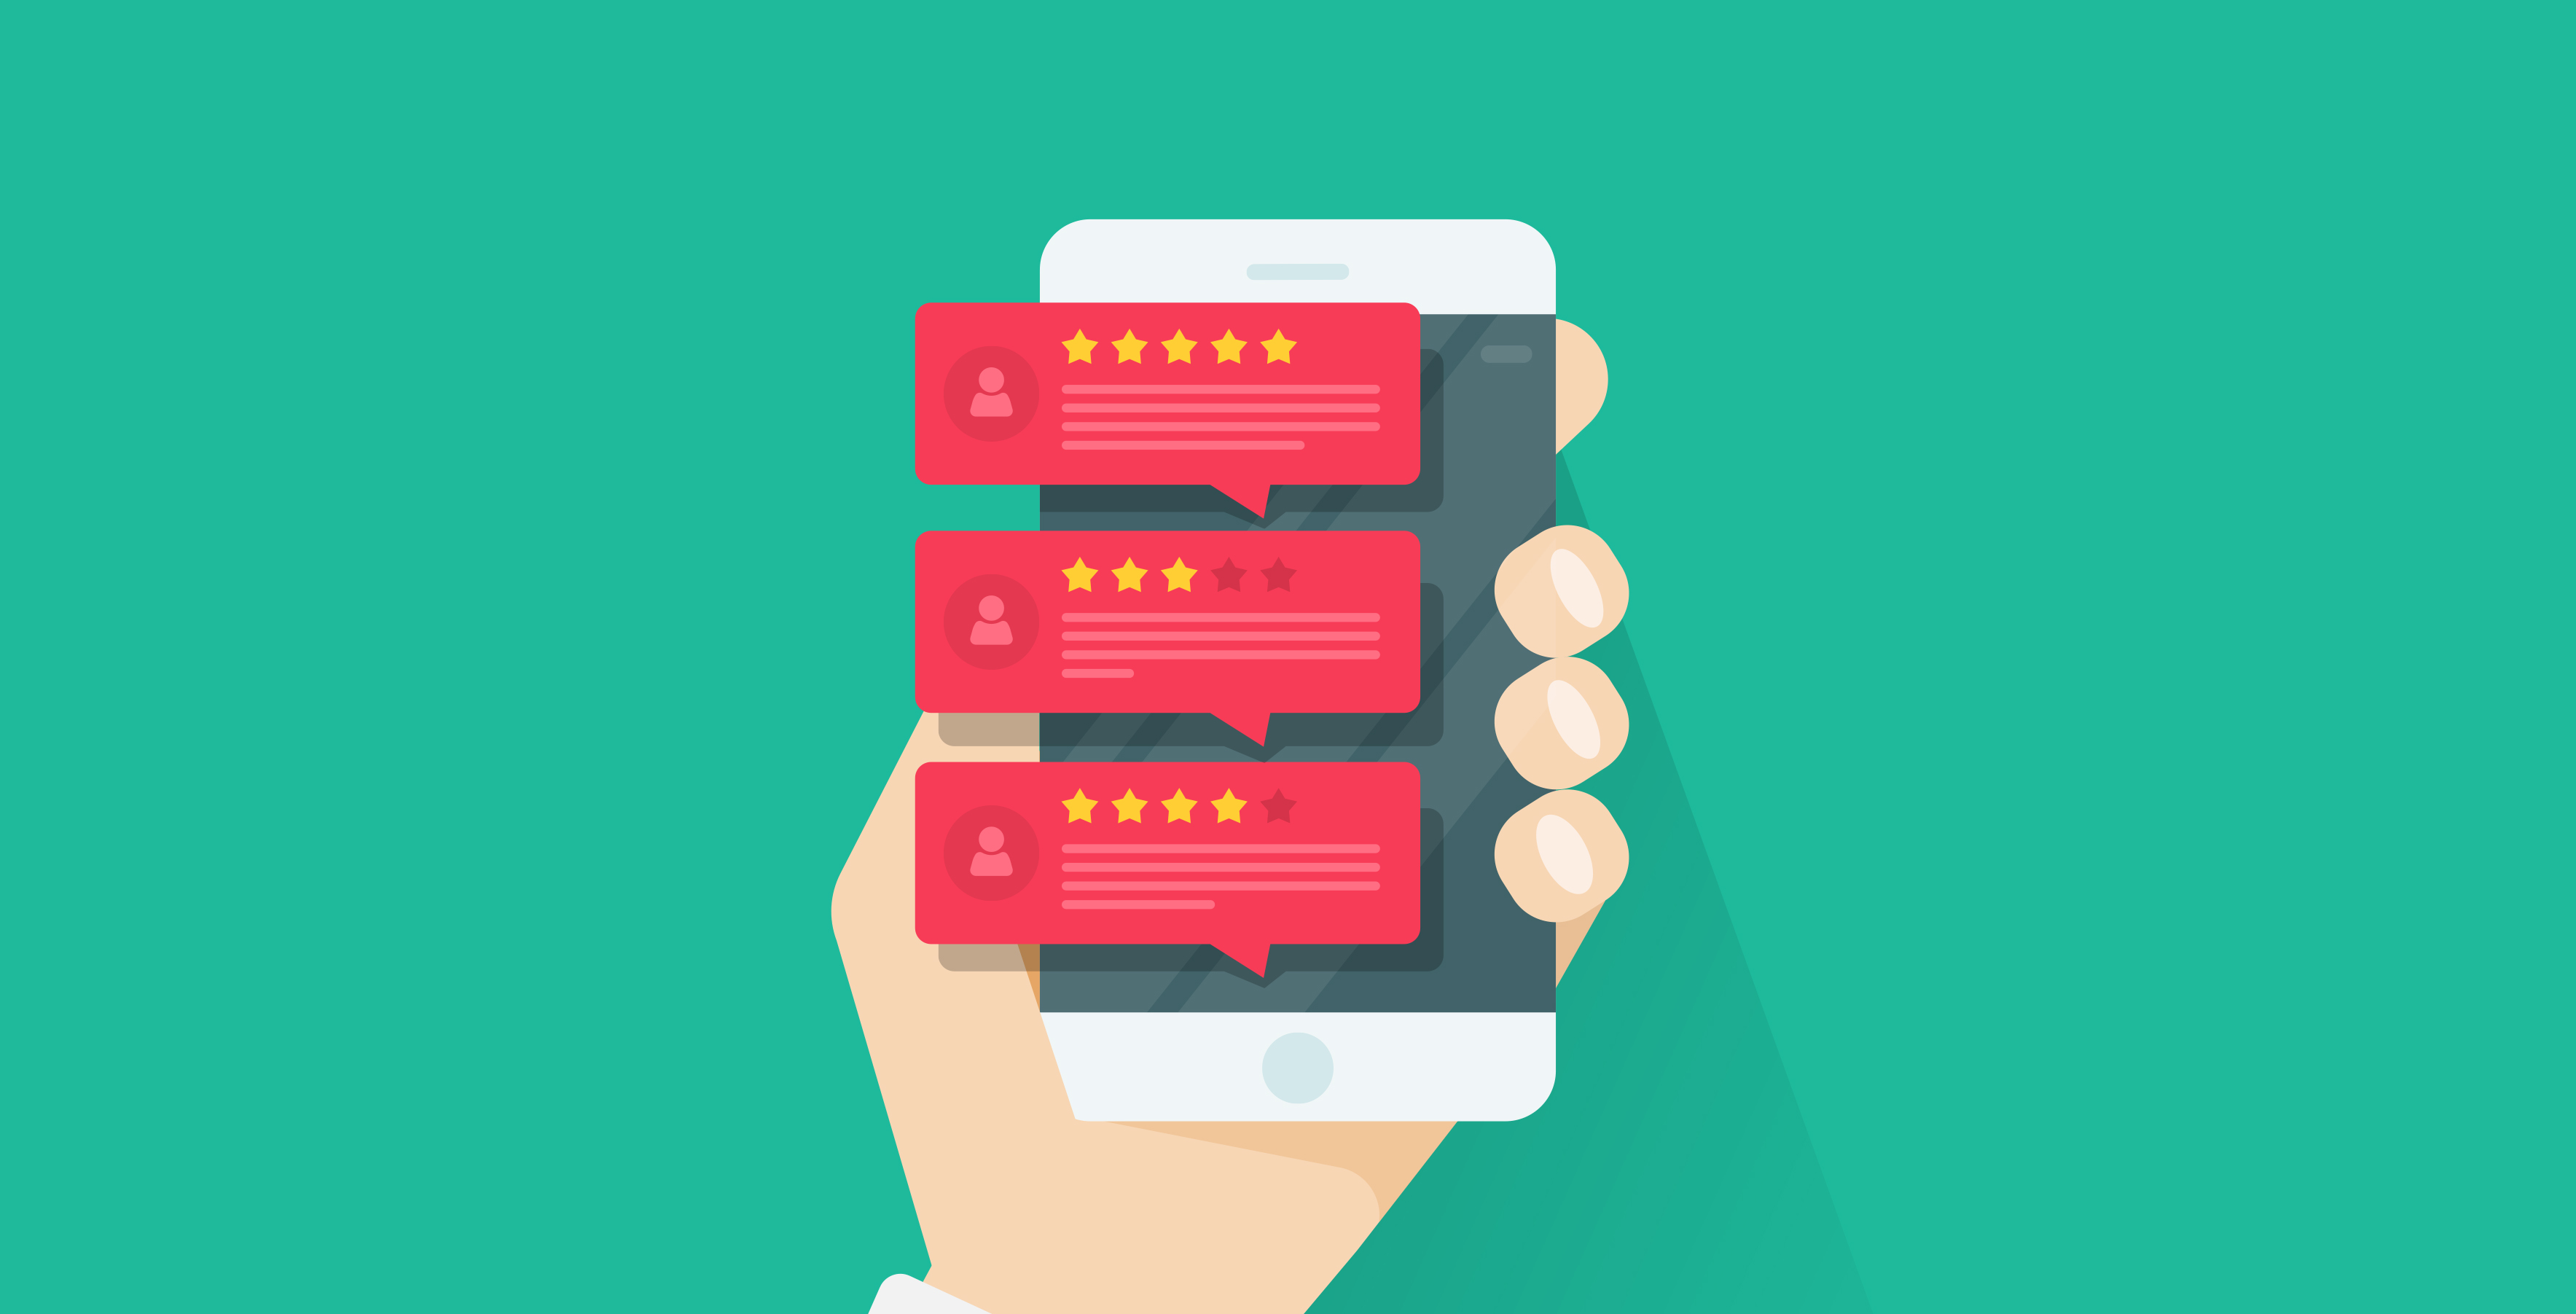 Best Practices for Handling All Reviews 91% of North American consumers rea...